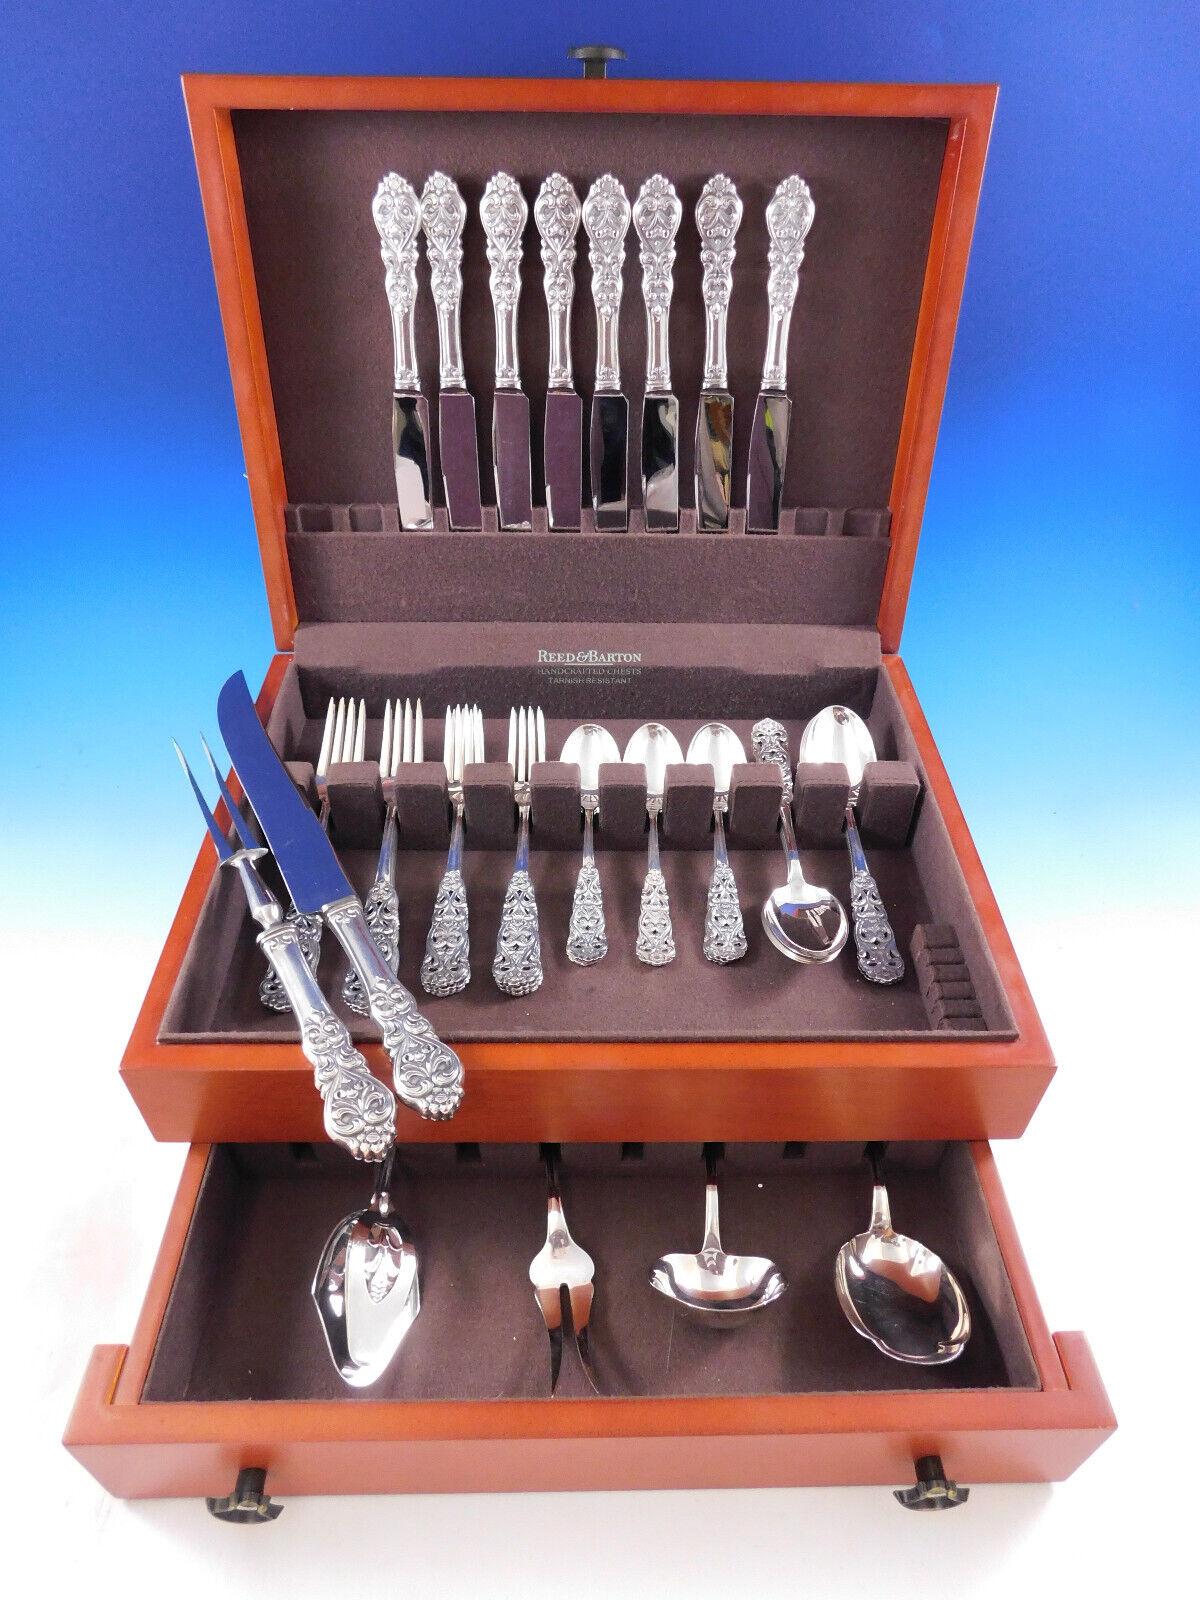 Valdres by Th. Marthinsen (Norway) 830 silver flatware set with ornate pierced handle, 46 pieces. This set includes:

8 Dinner Knives, 9 1/2